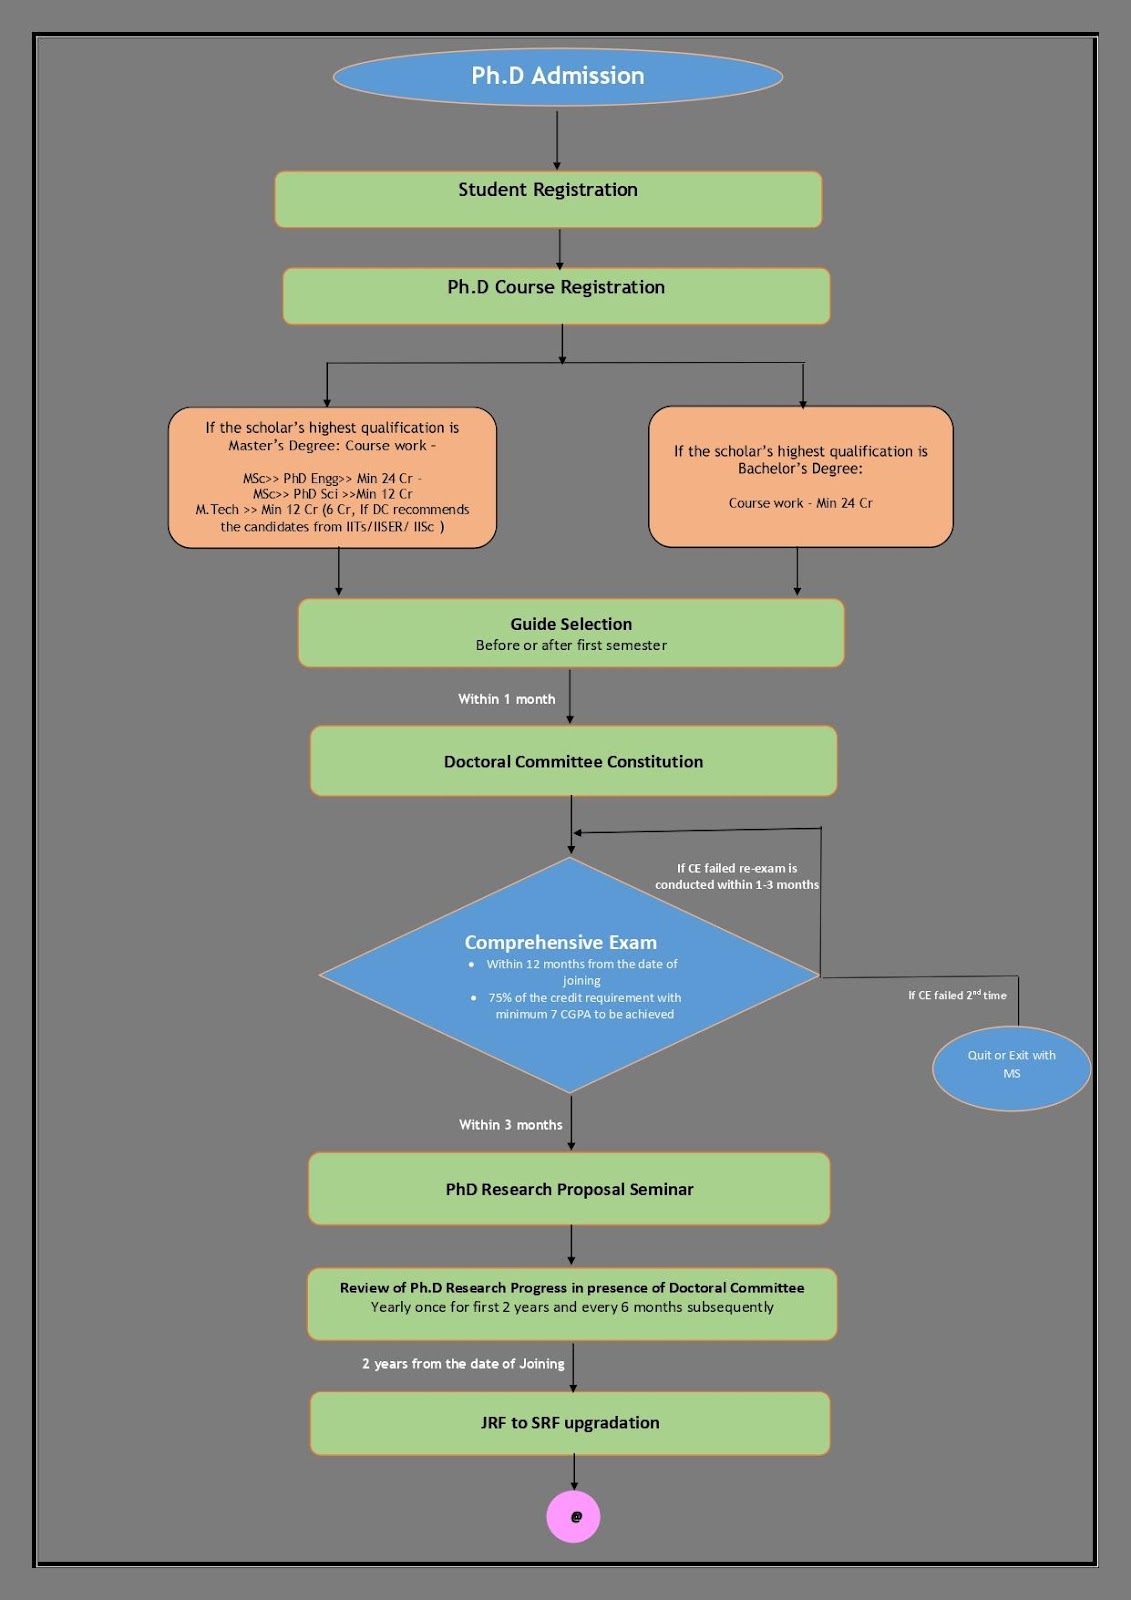 C:\Users\Brook Side\Downloads\ilovepdf_pages-to-jpg\Ph.D flow chart for FAQs_page-0001.jpg